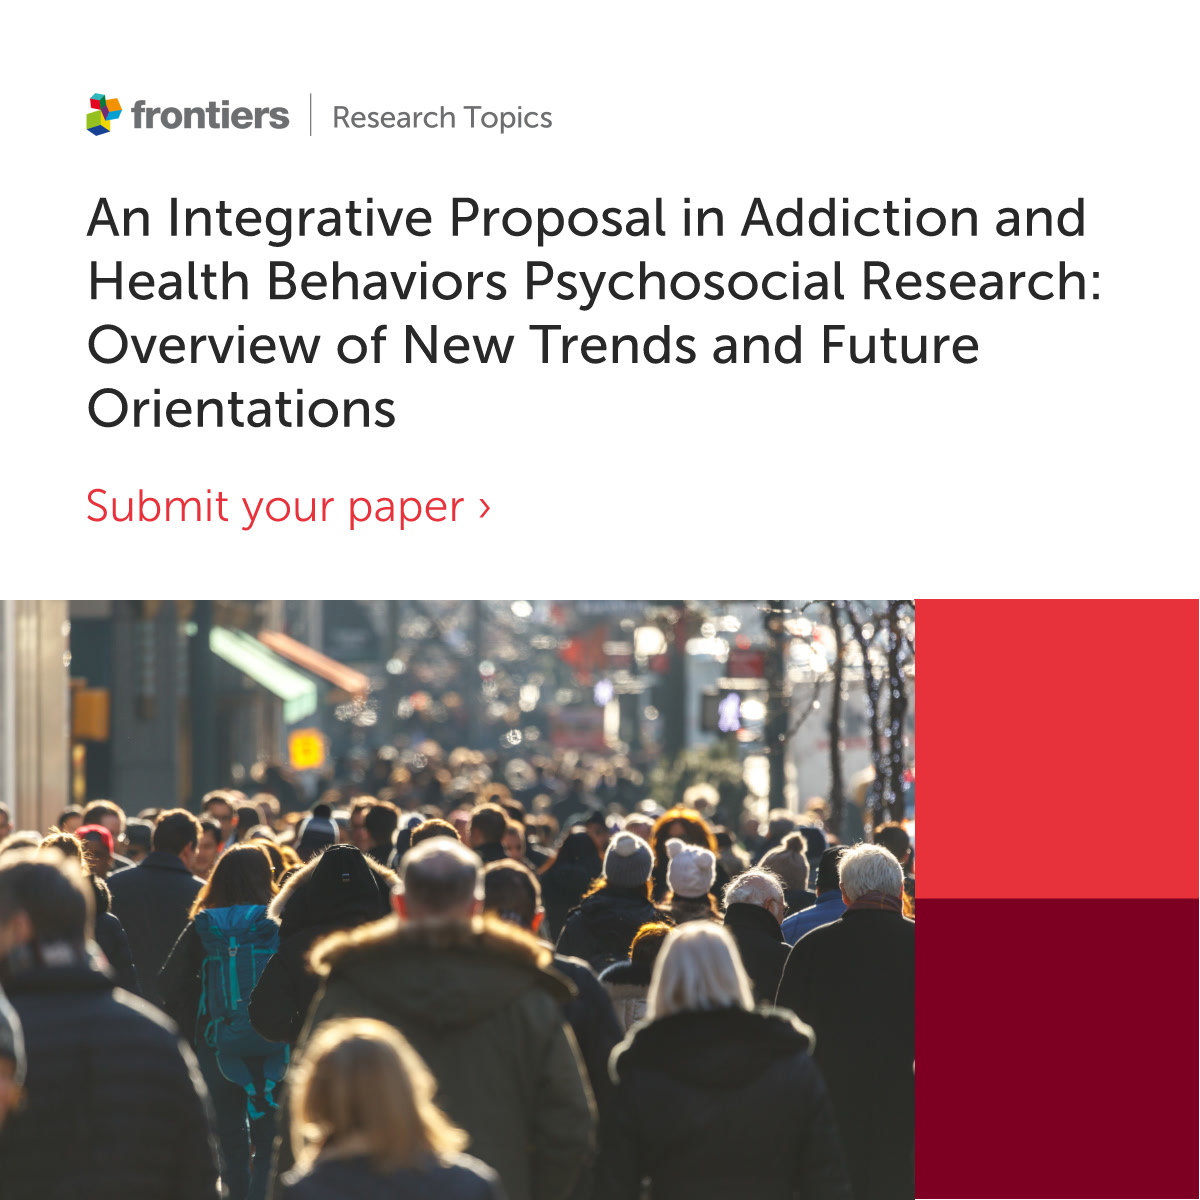 Our latest Research Topic is now online! ➡️Click here to see 'An Integrative Proposal in Addiction and Health Behaviors Psychosocial Research: Overview of New Trends and Future Orientations' led by Álvaro García Del Castillo-López @agdcastillo fro.ntiers.in/ndn9